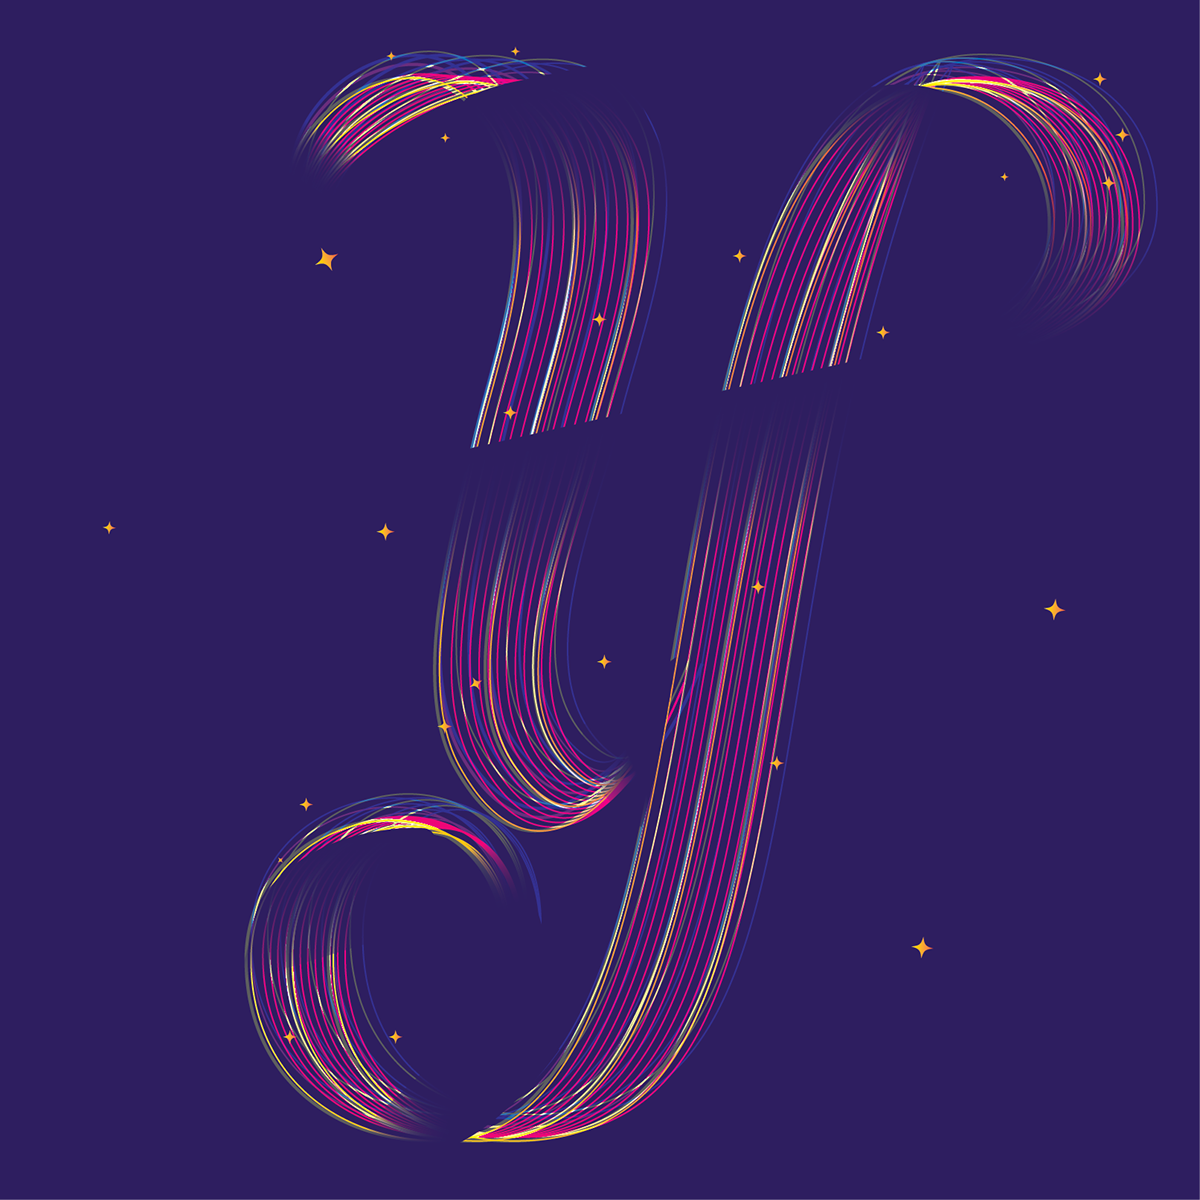 lettering type days alphabet numbers vector papercraft 36daysoftype 36days #36daysoftype letras tipografia